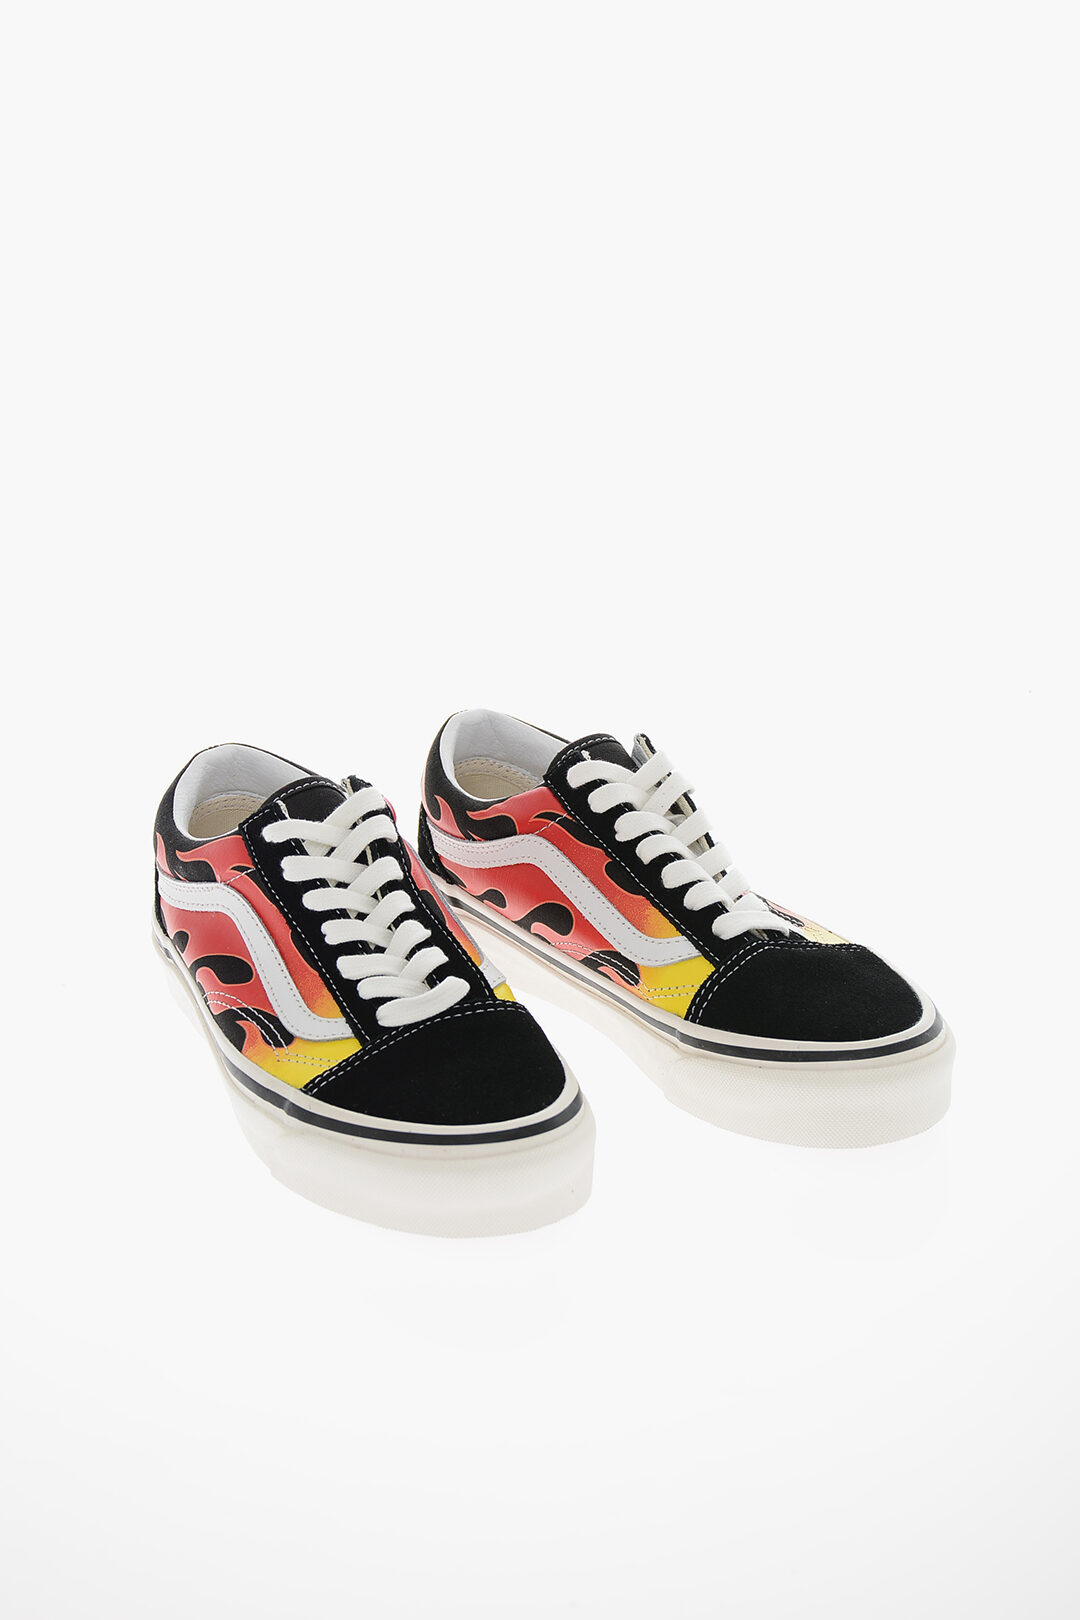 Vans FACTORY Leather and Fabric OLD 36 Sneakers with Flames Print women - Glamood Outlet